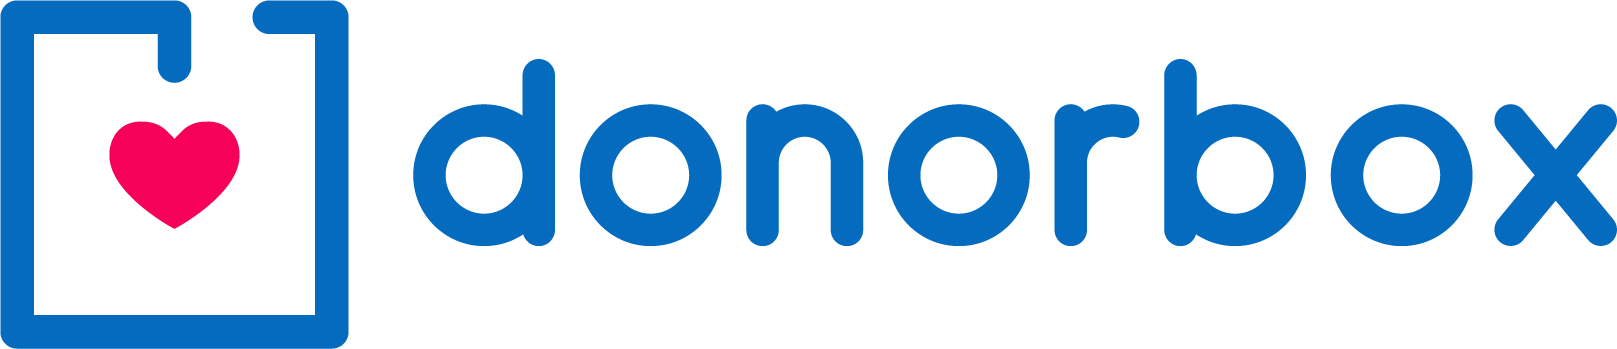 logo donorbox